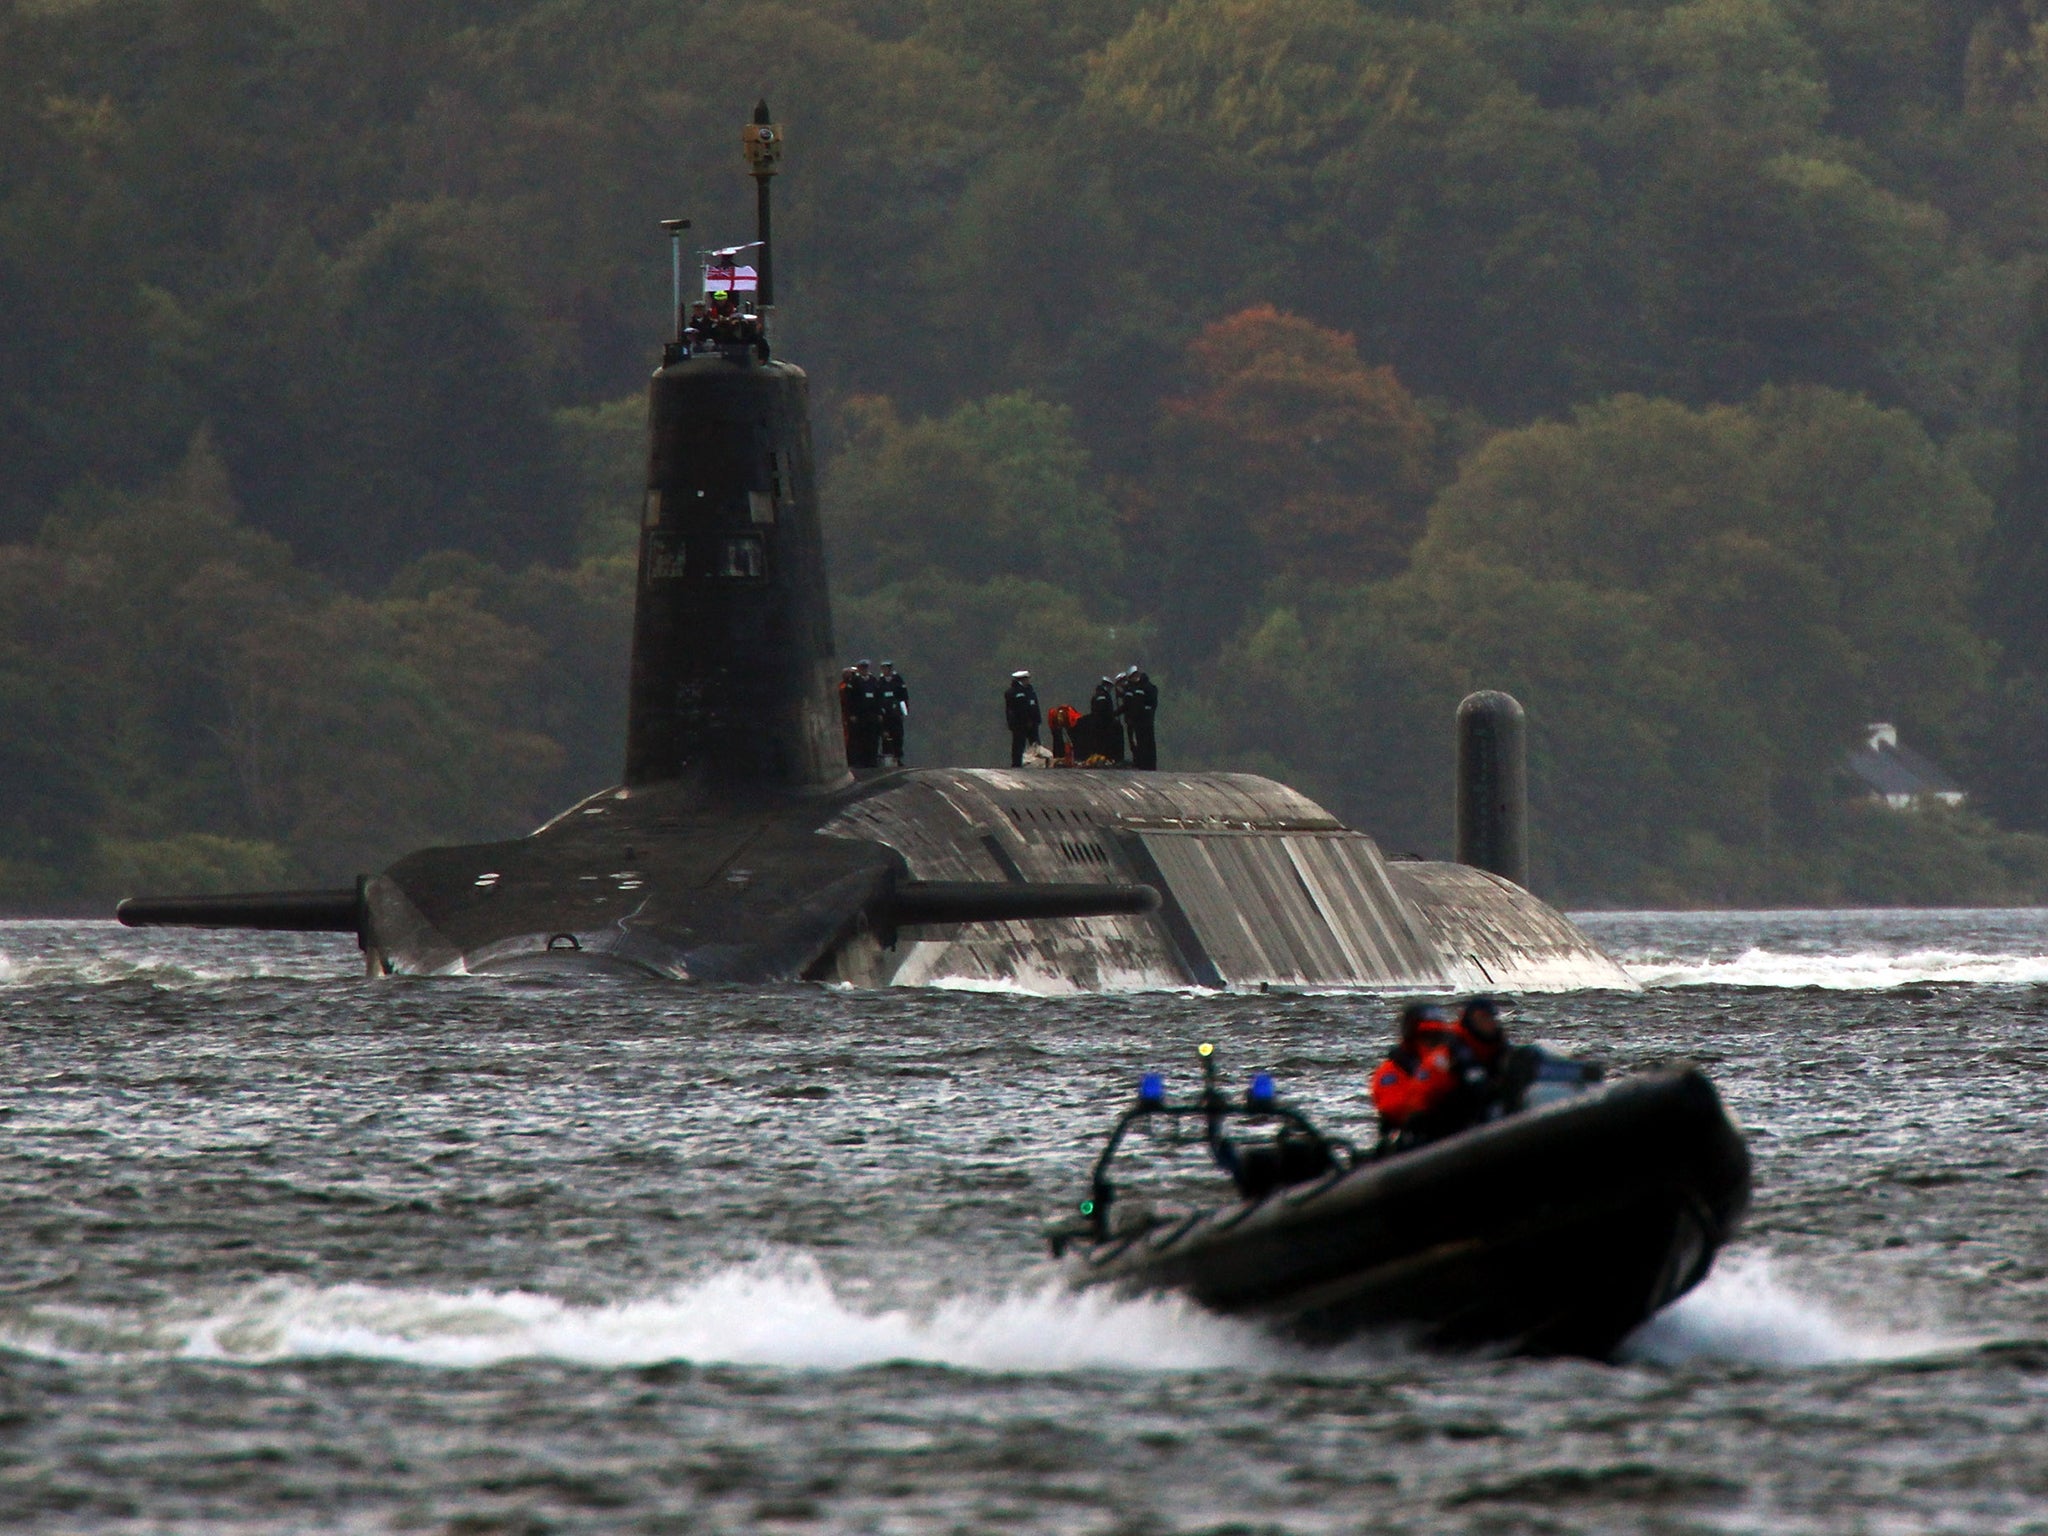 Faslane, on the River Clyde, is the home of Britain’s fleet of Trident nuclear submarines